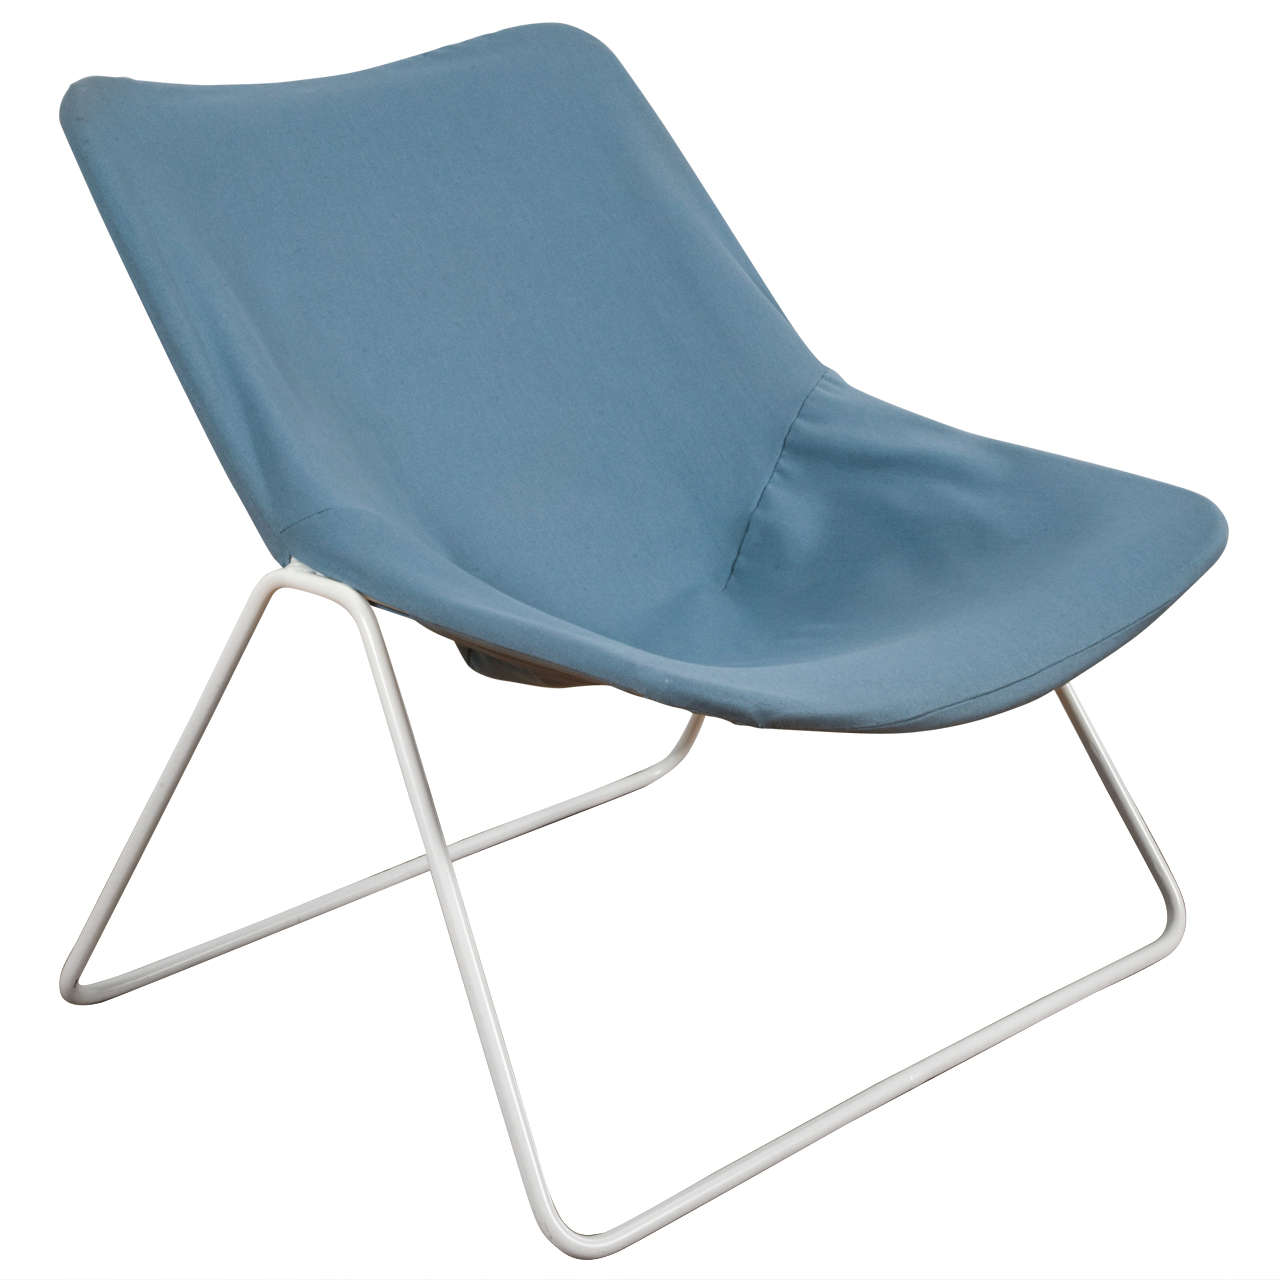 Chair of G1 by Pierre Guariche - Airborne edition - 1953 For Sale